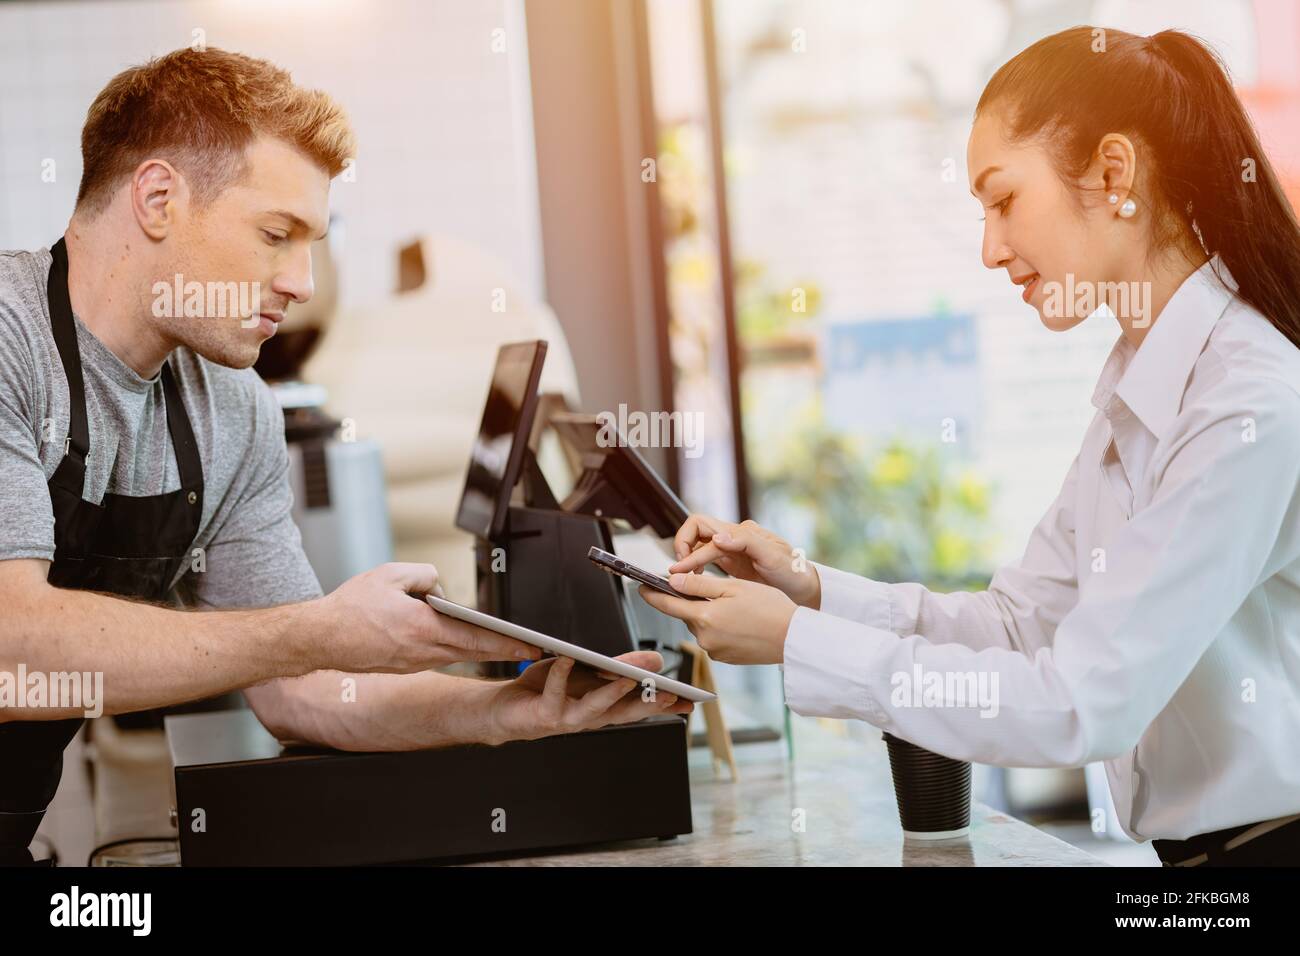 cafe customer using mobile internet banking scan QR payment code for coffee drink from barista staff at the counter, Cashless society modern lifestyle Stock Photo